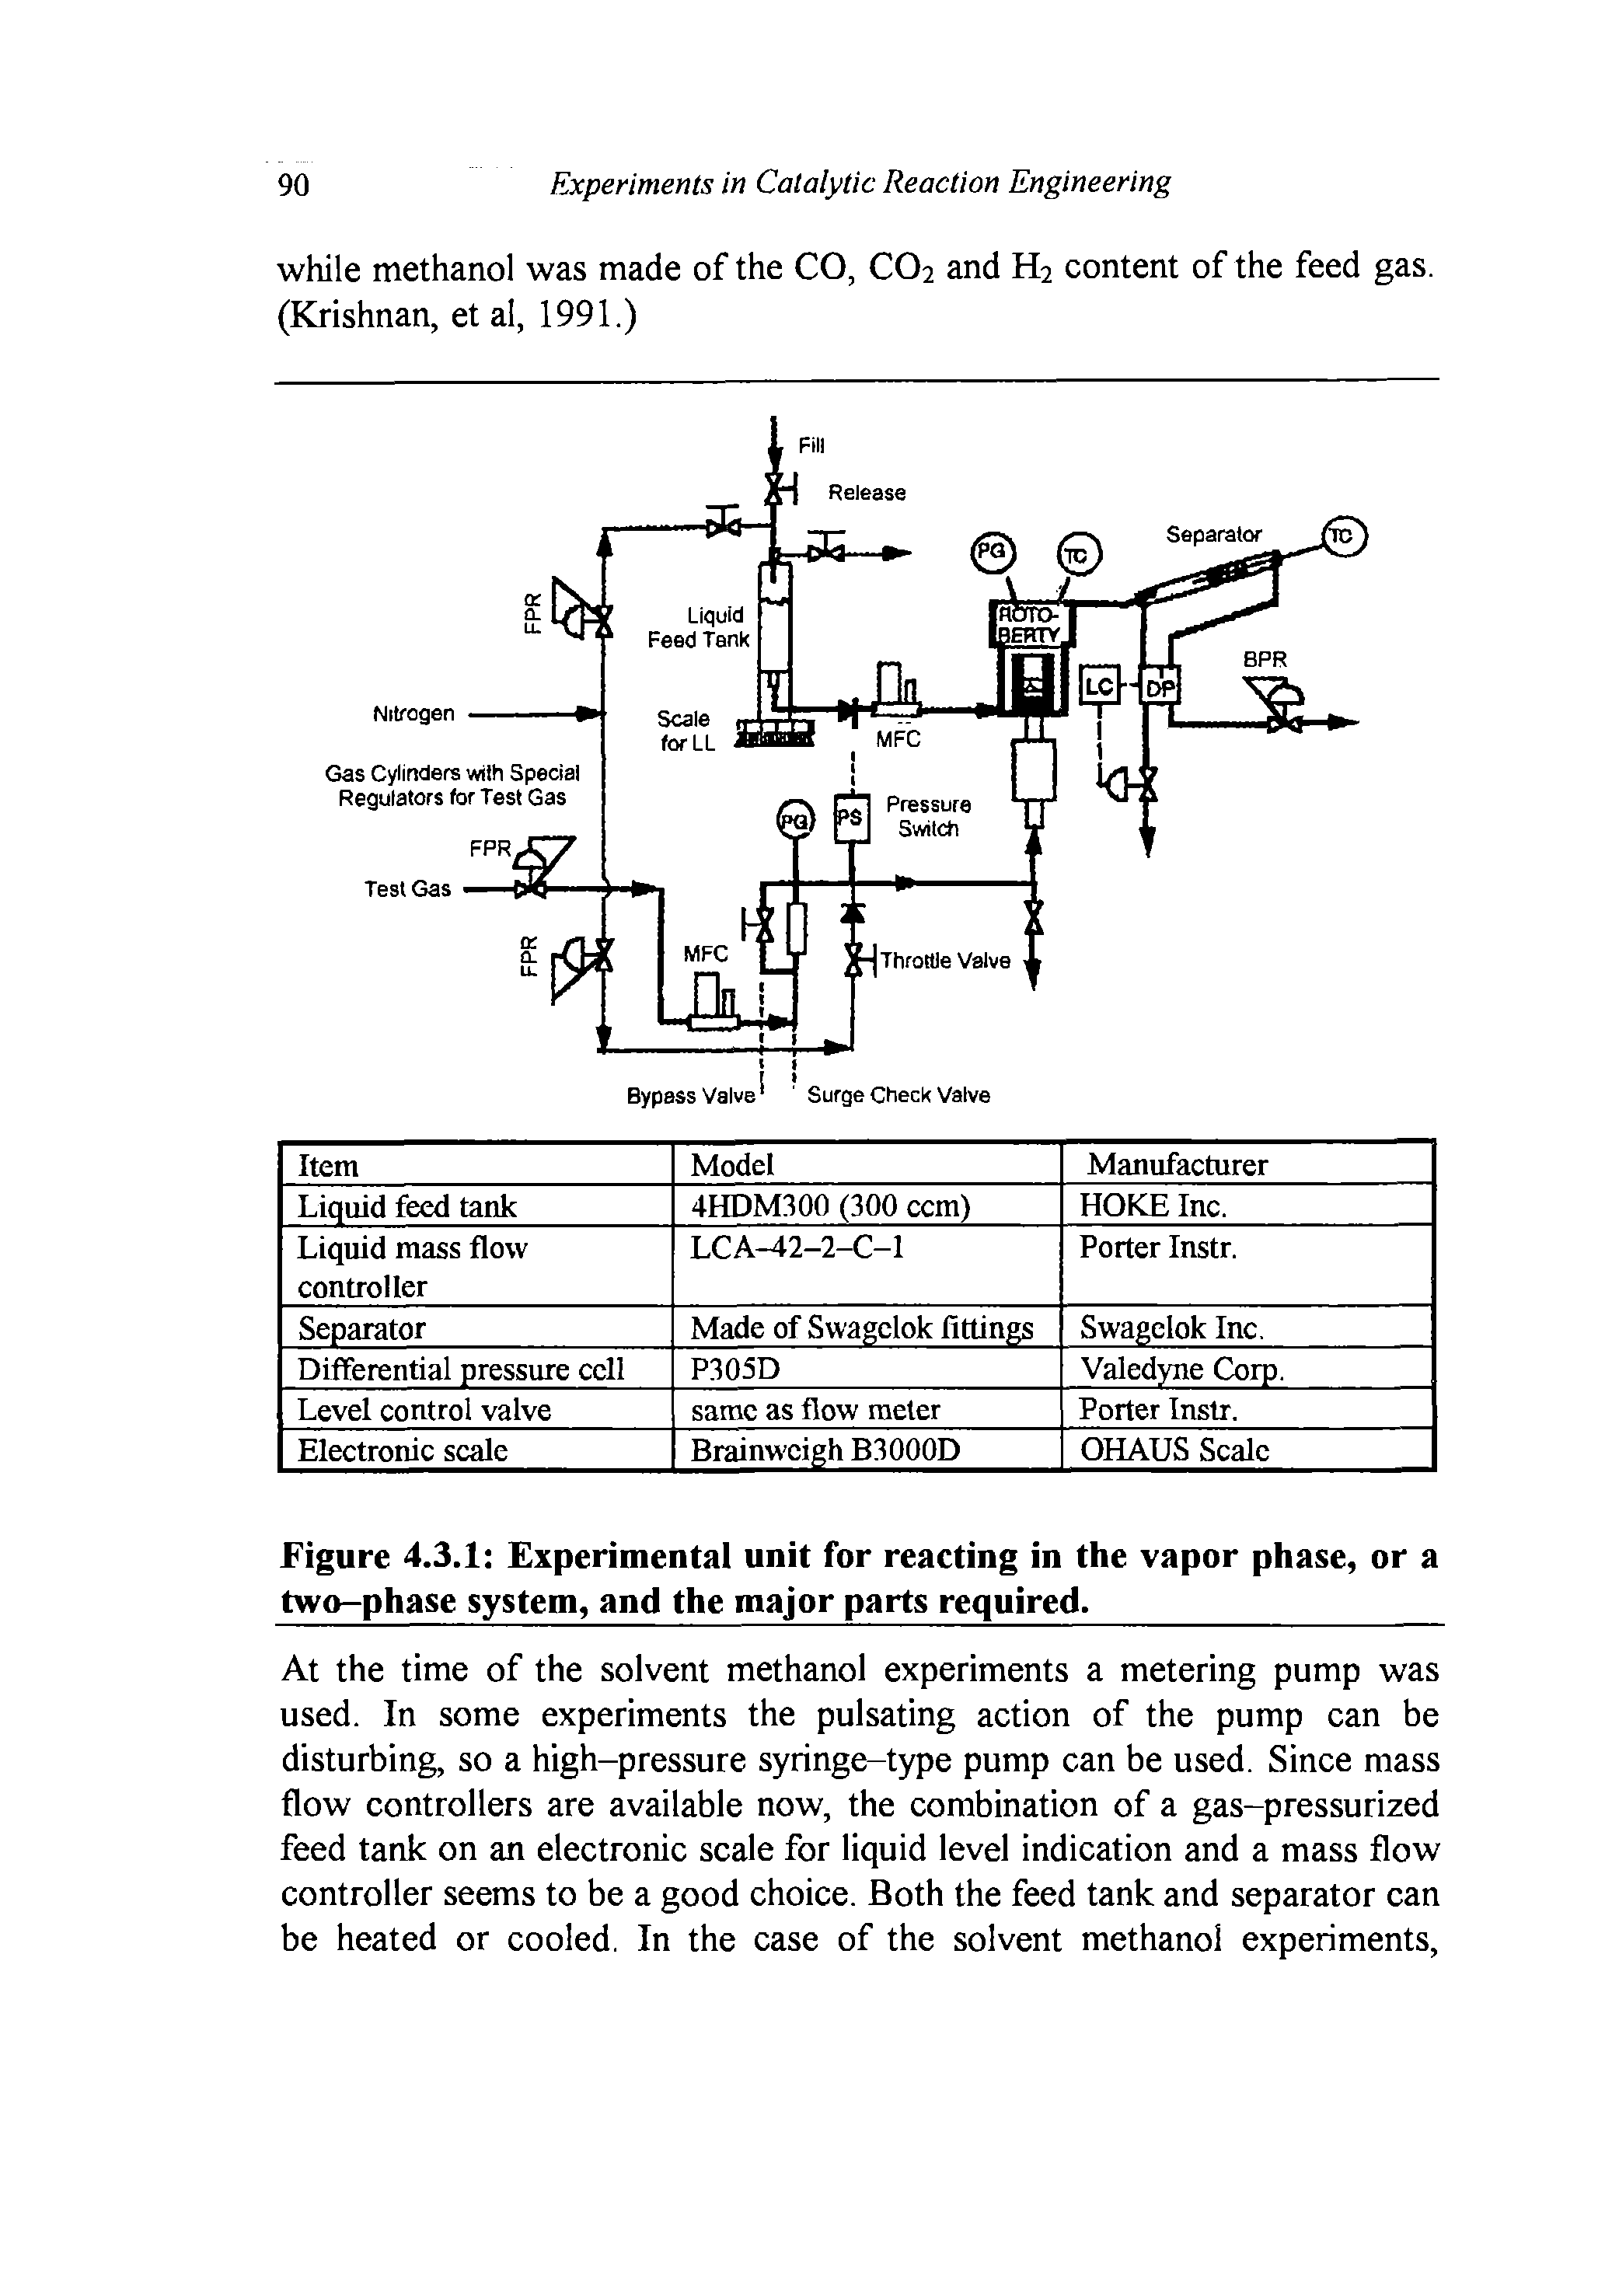 Figure 4.3.1 Experimental unit for reacting in the vapor phase, or a two-phase system, and the major parts required.